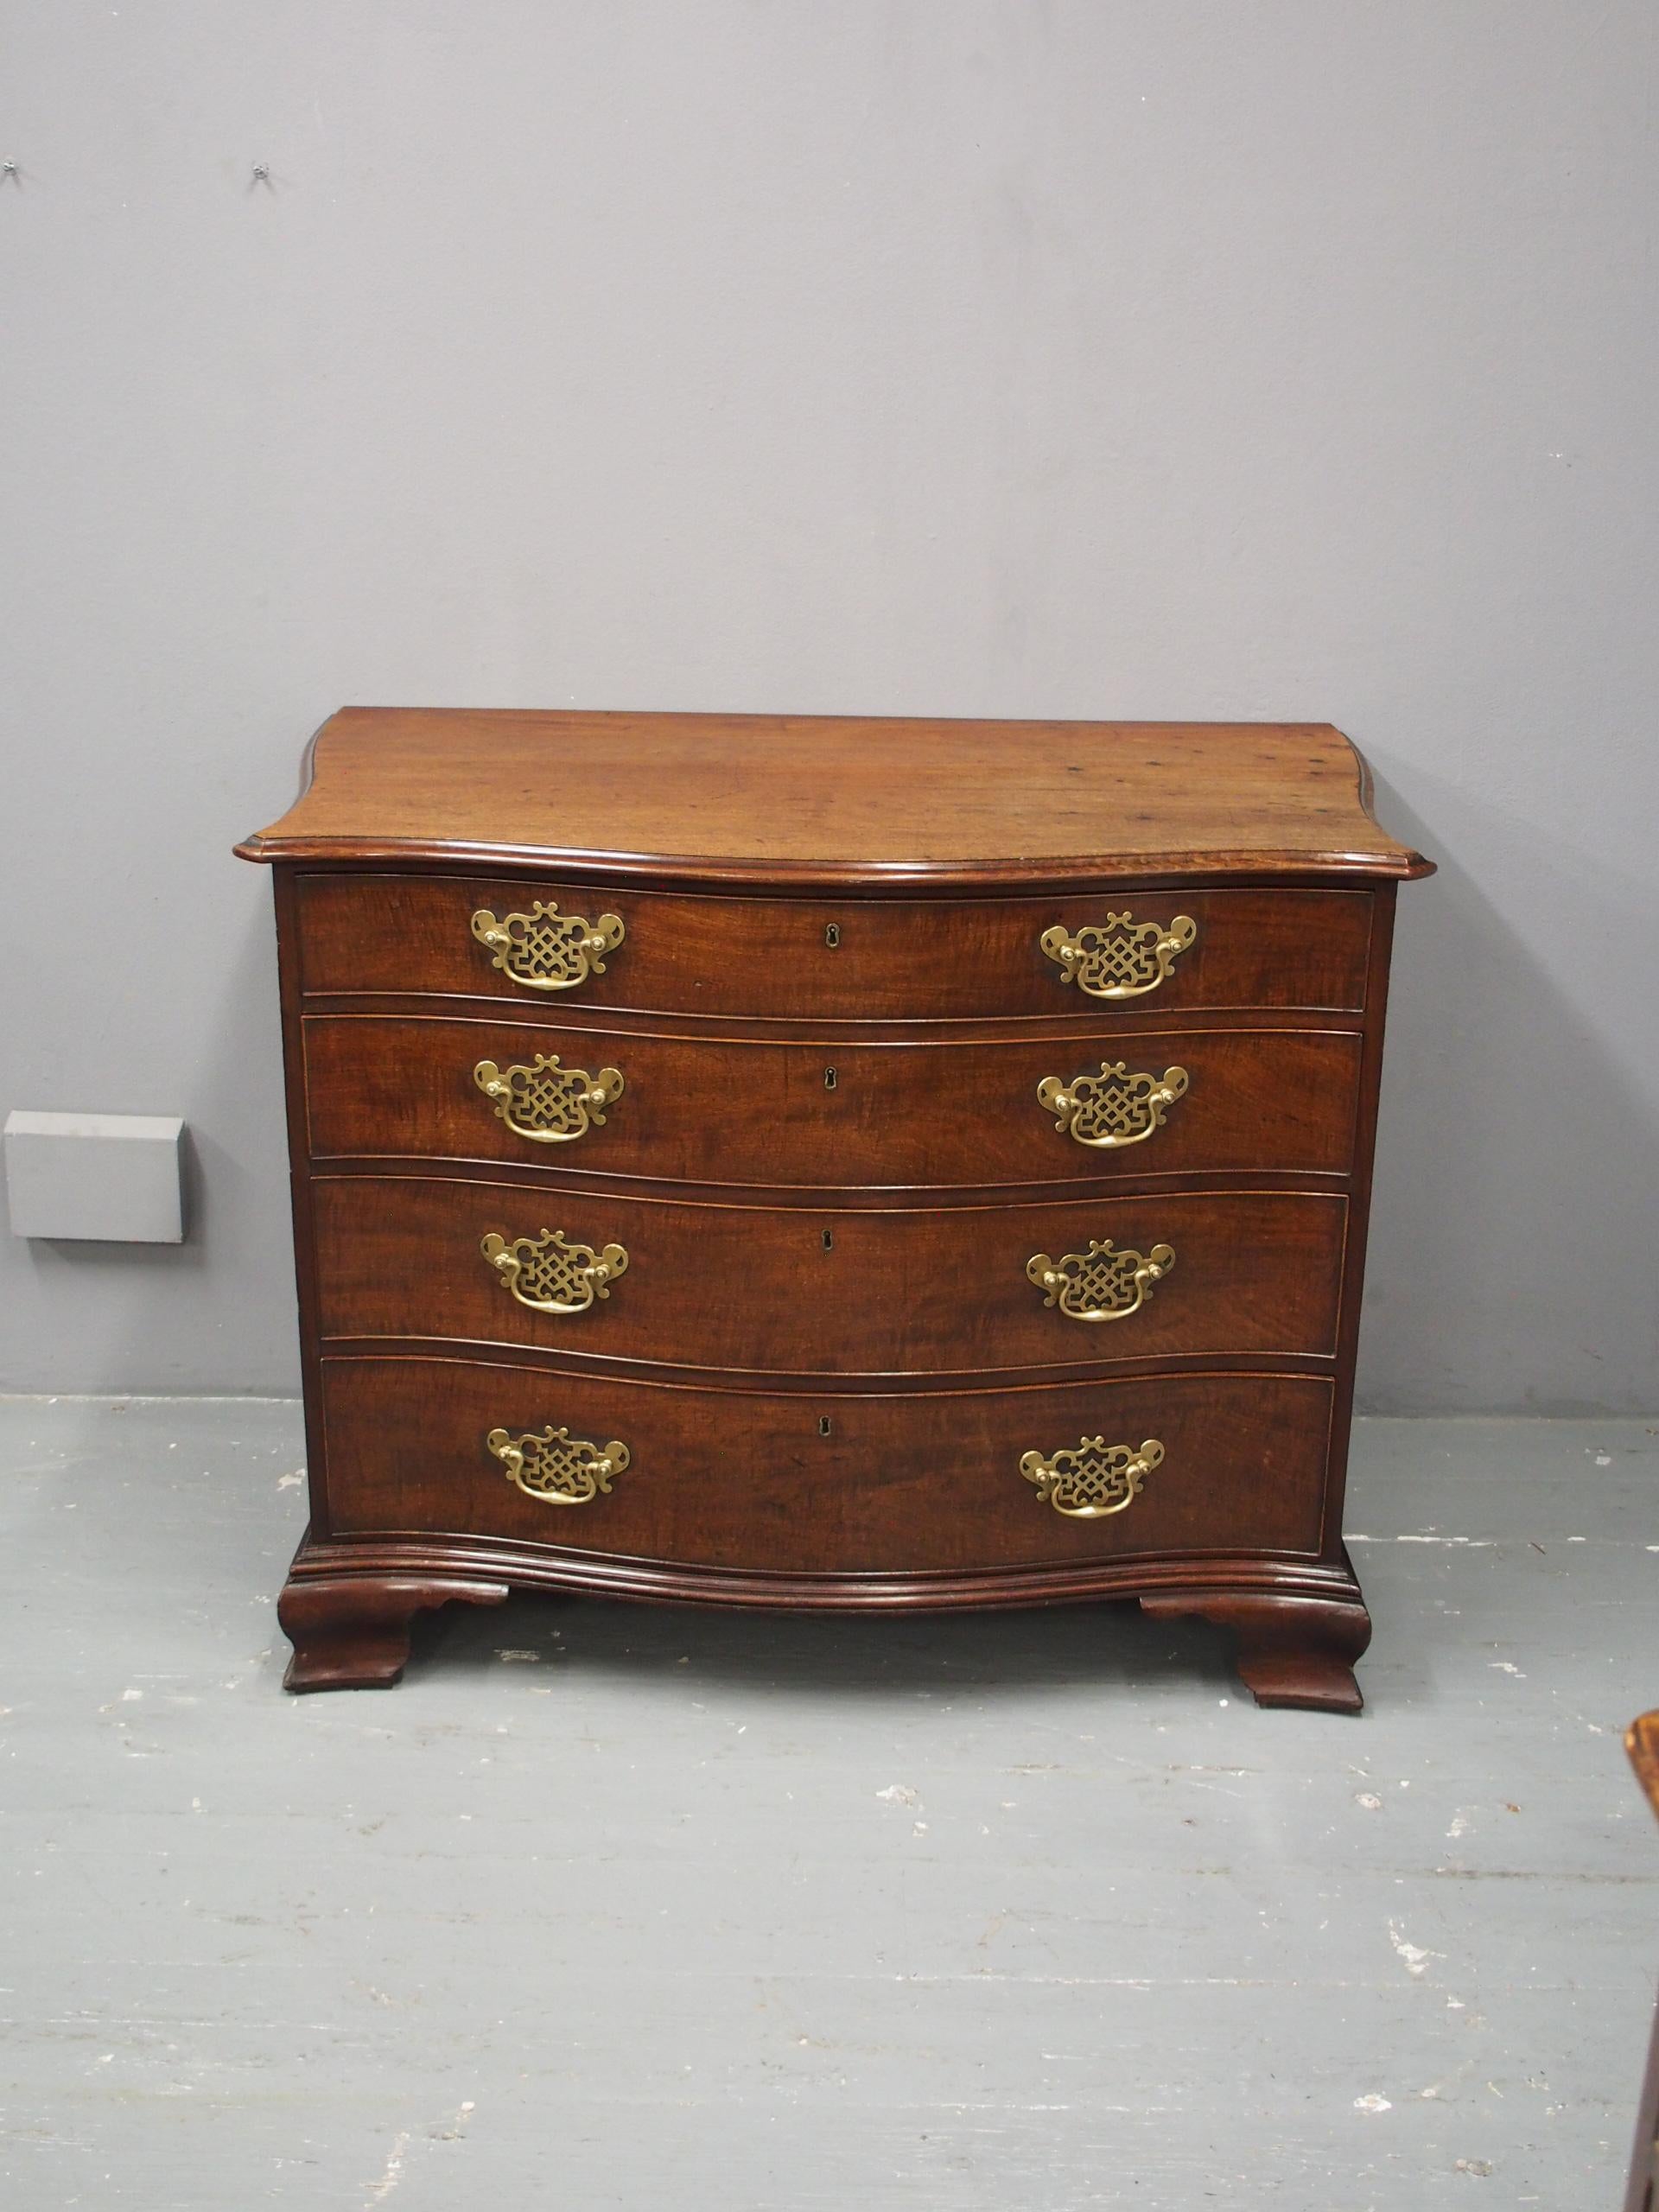 Circa 1770, George III mahogany chest of drawers or commode. The top has a serpentine front and unusually, serpentine sides in figured mahogany with moulded edges above four graduated, cock-beaded long drawers in fiddle back mahogany with